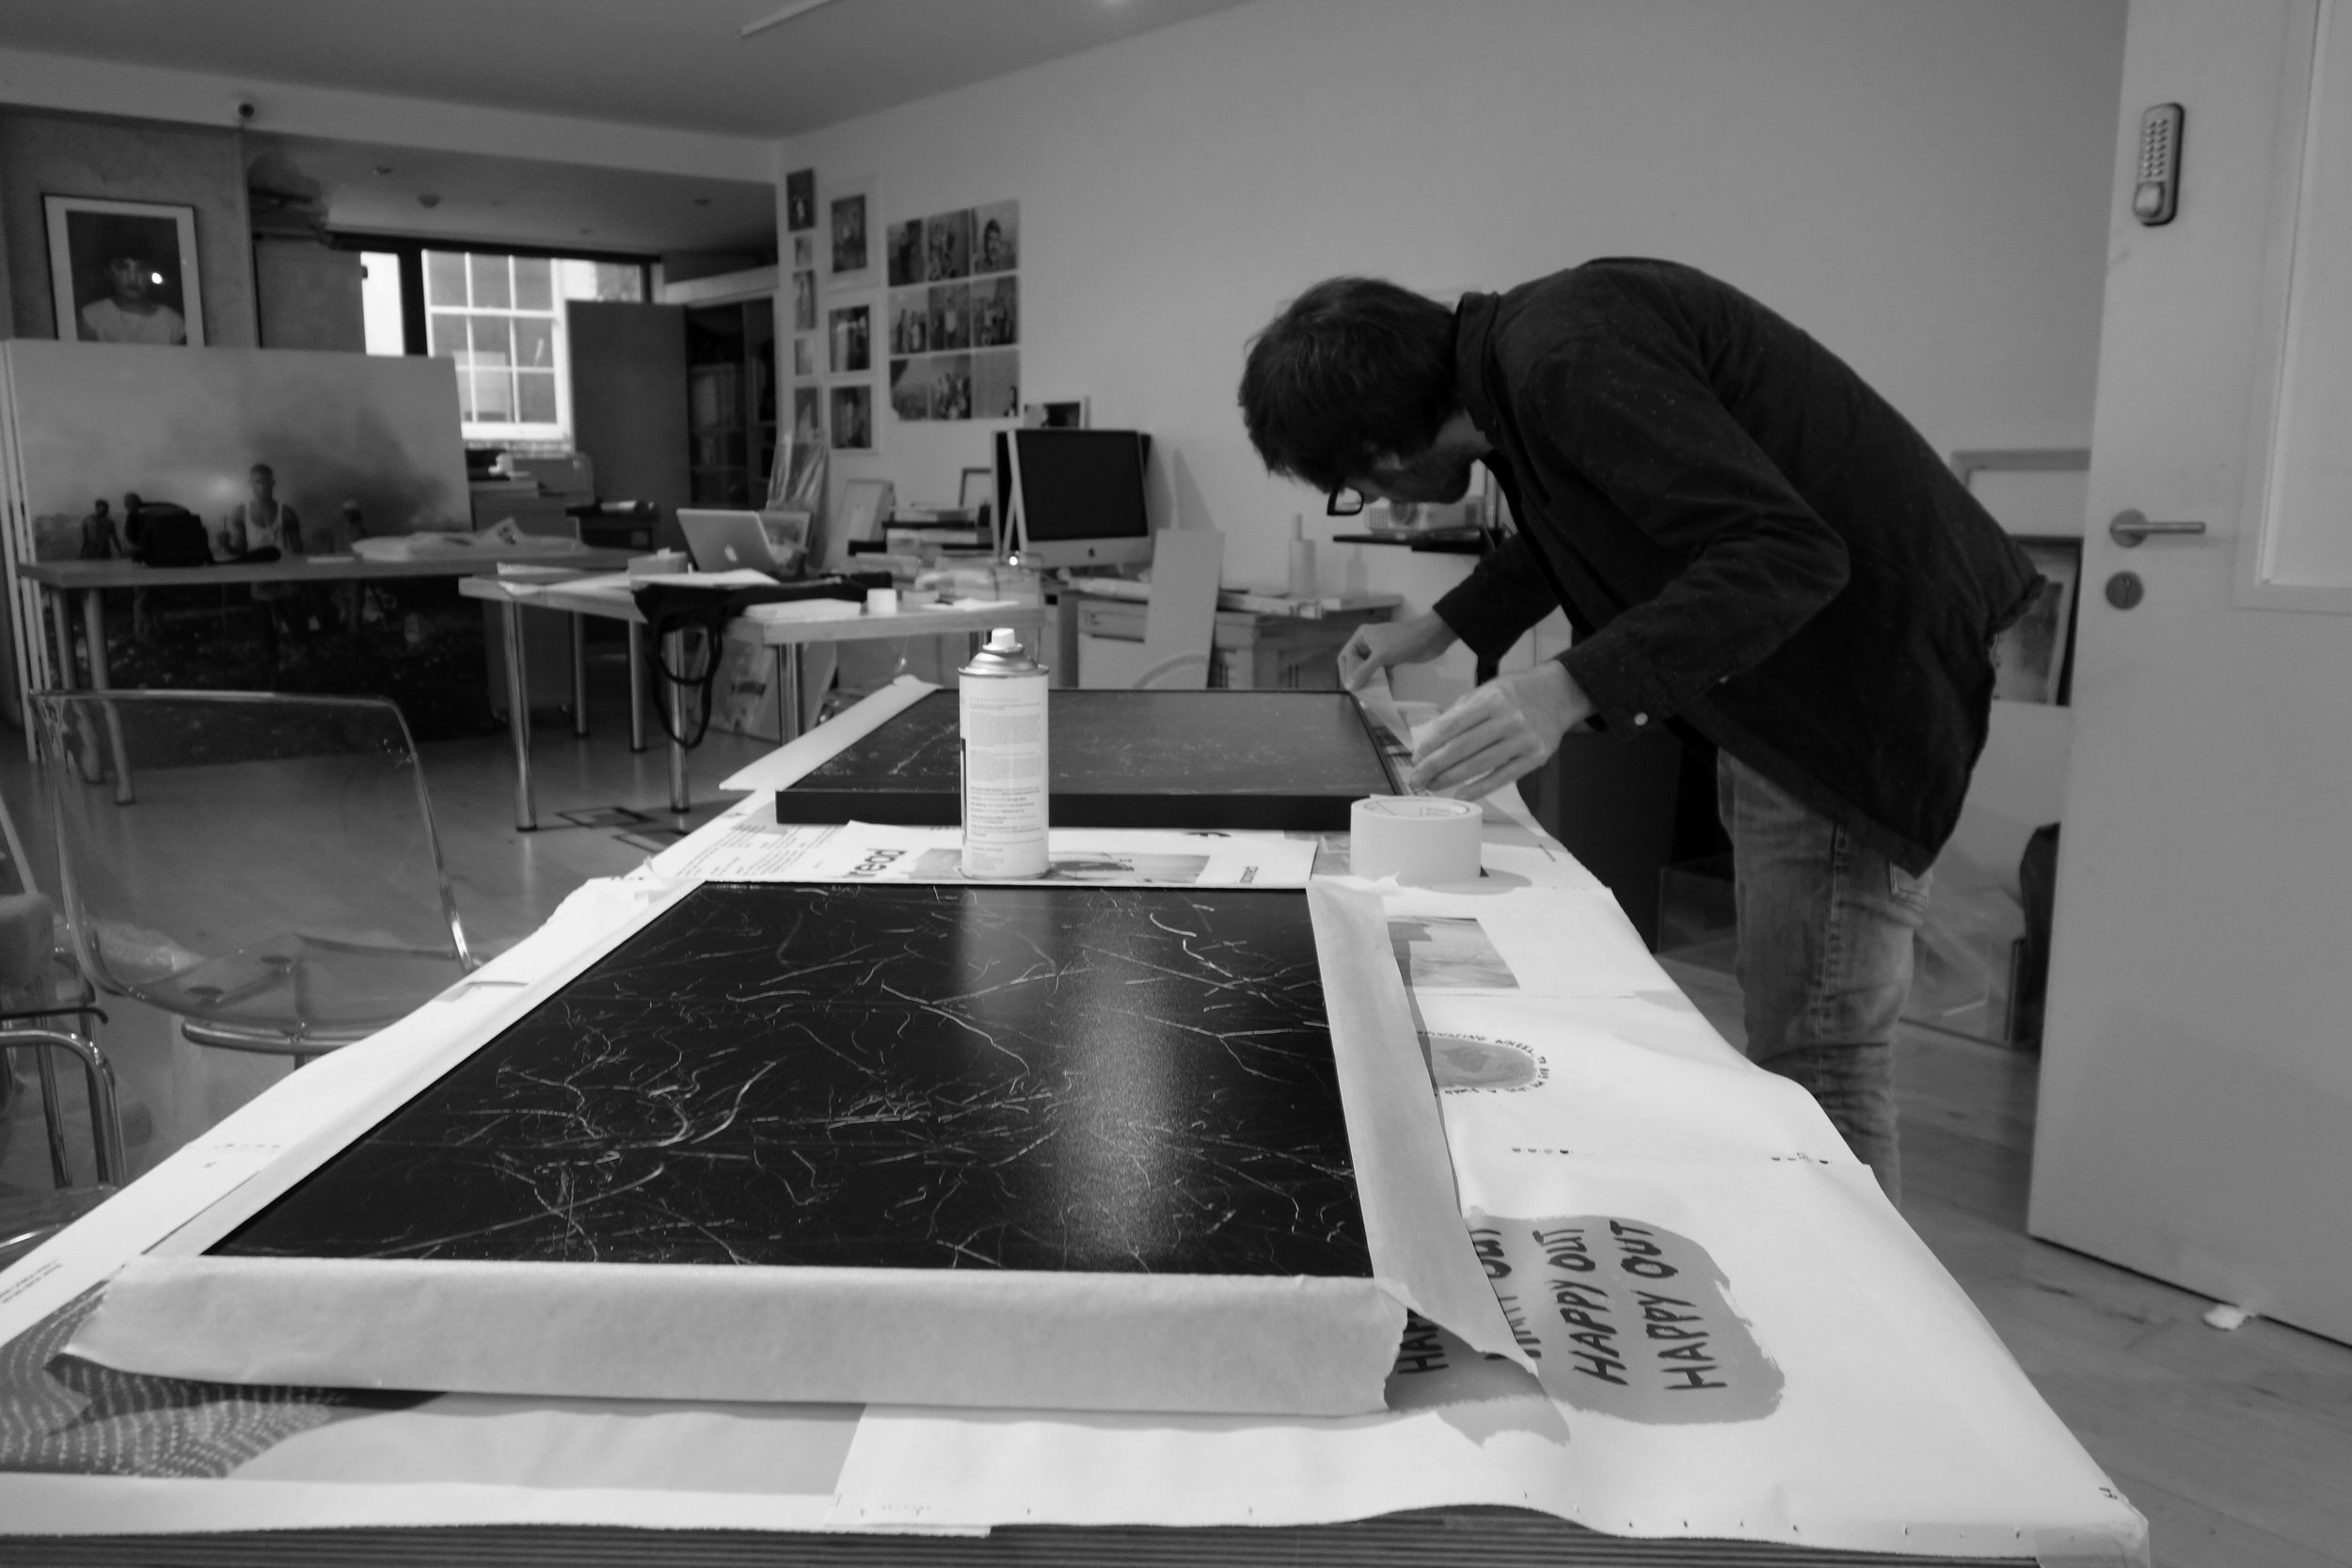  Paul Gaffney preparing his work for the exhibition 